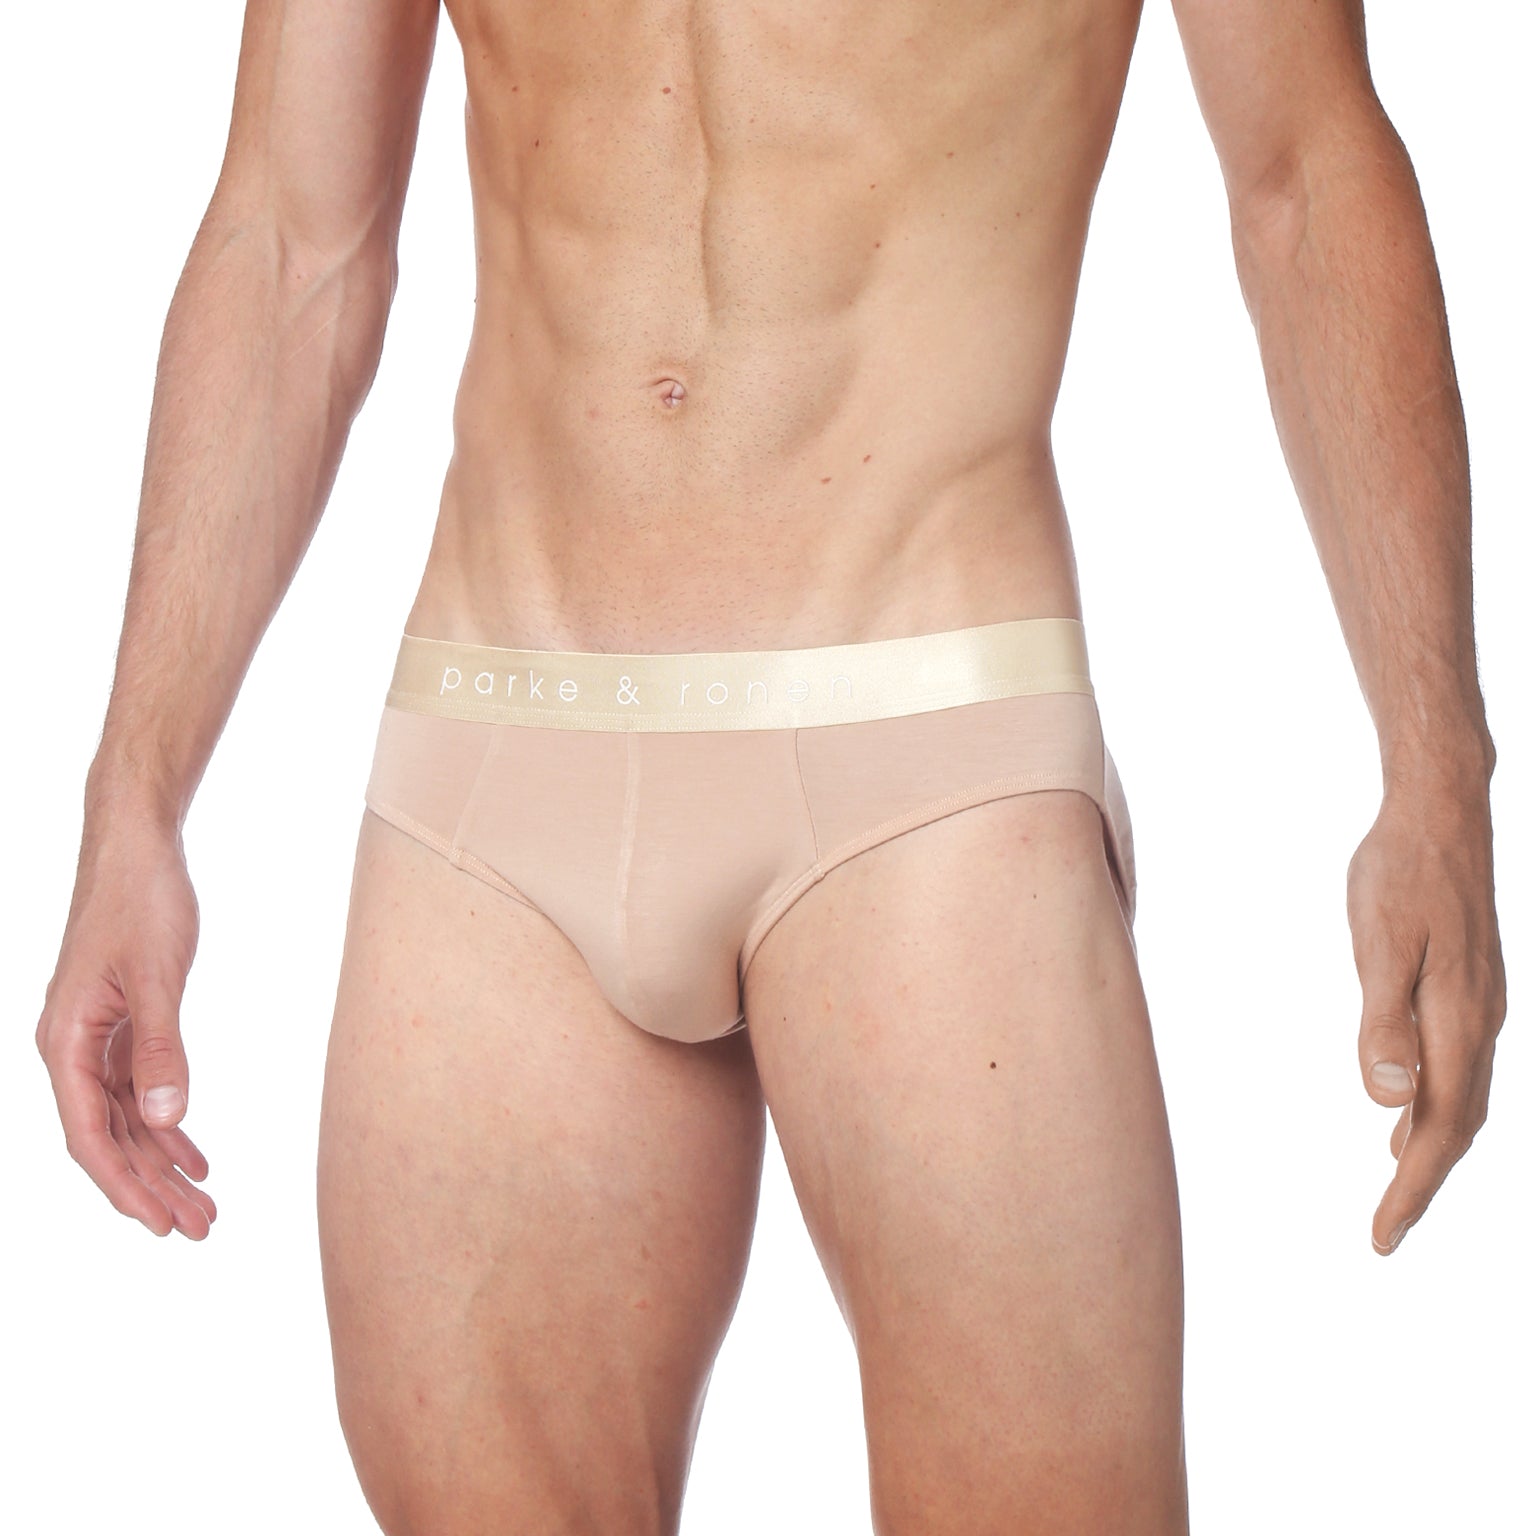 NEW- Champagne Low-Rise Brief - parke & ronen